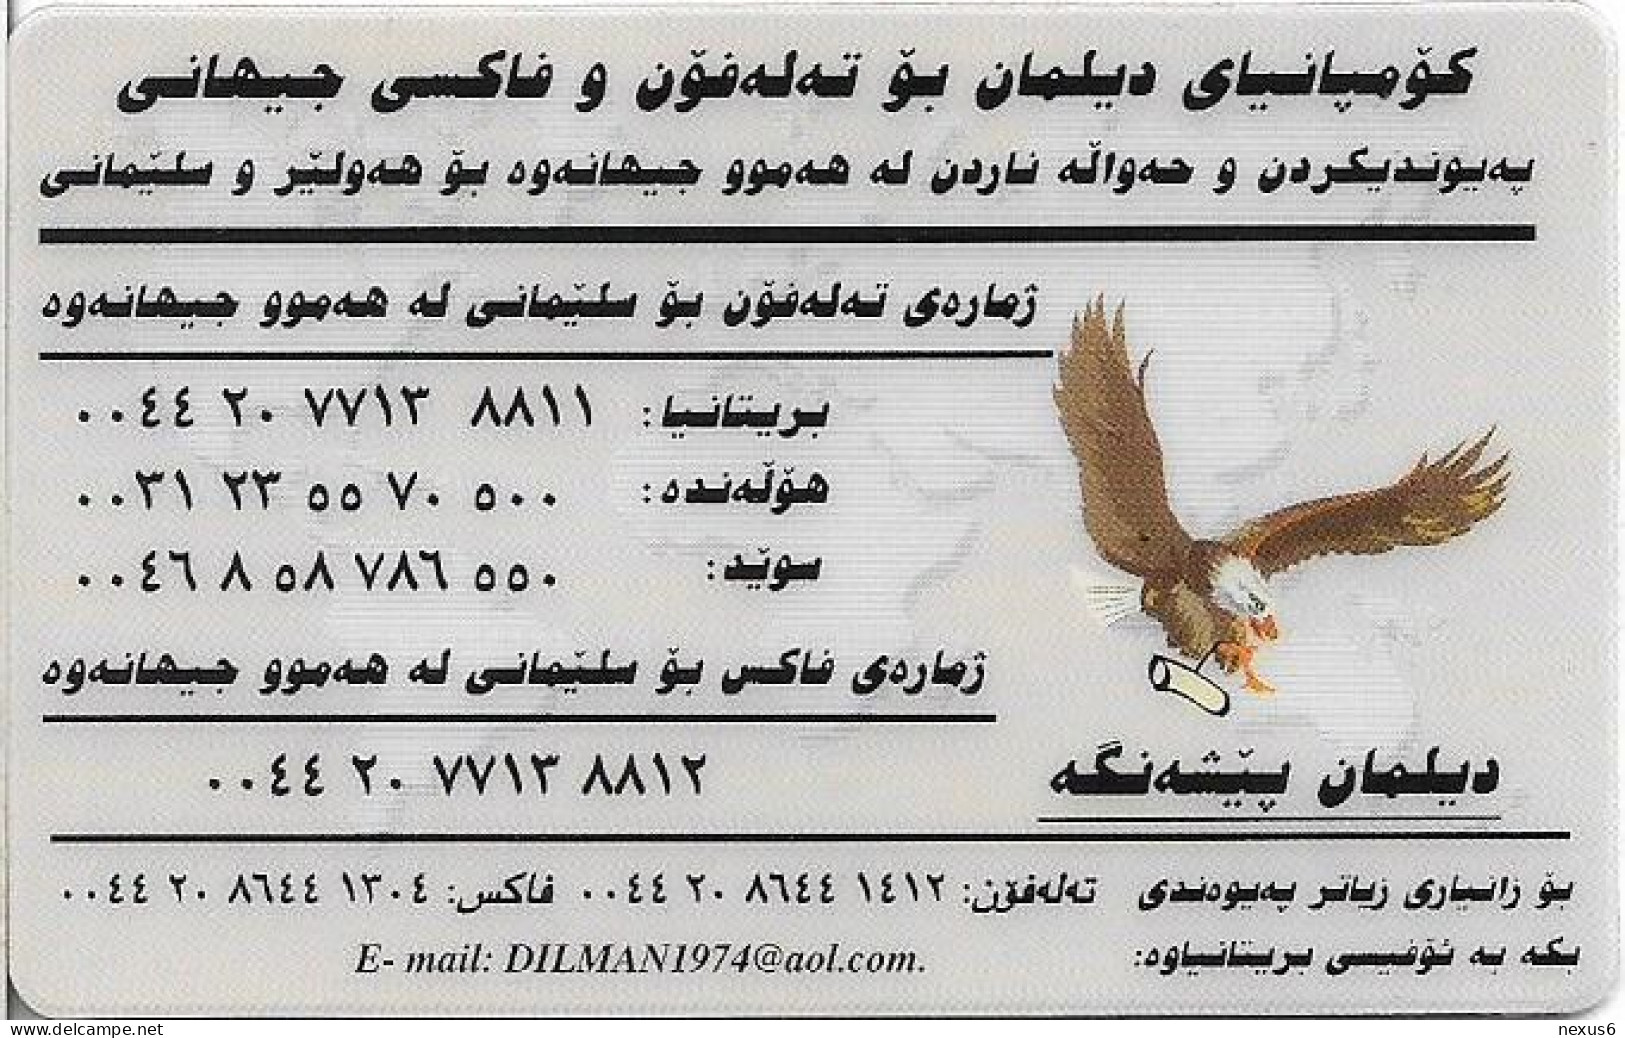 UK & Others - DILMAN (Kurdistan Calls) - Dilman Is The Best, Eagle (White Issue), Remote Mem. No FV, Used - Bedrijven Uitgaven